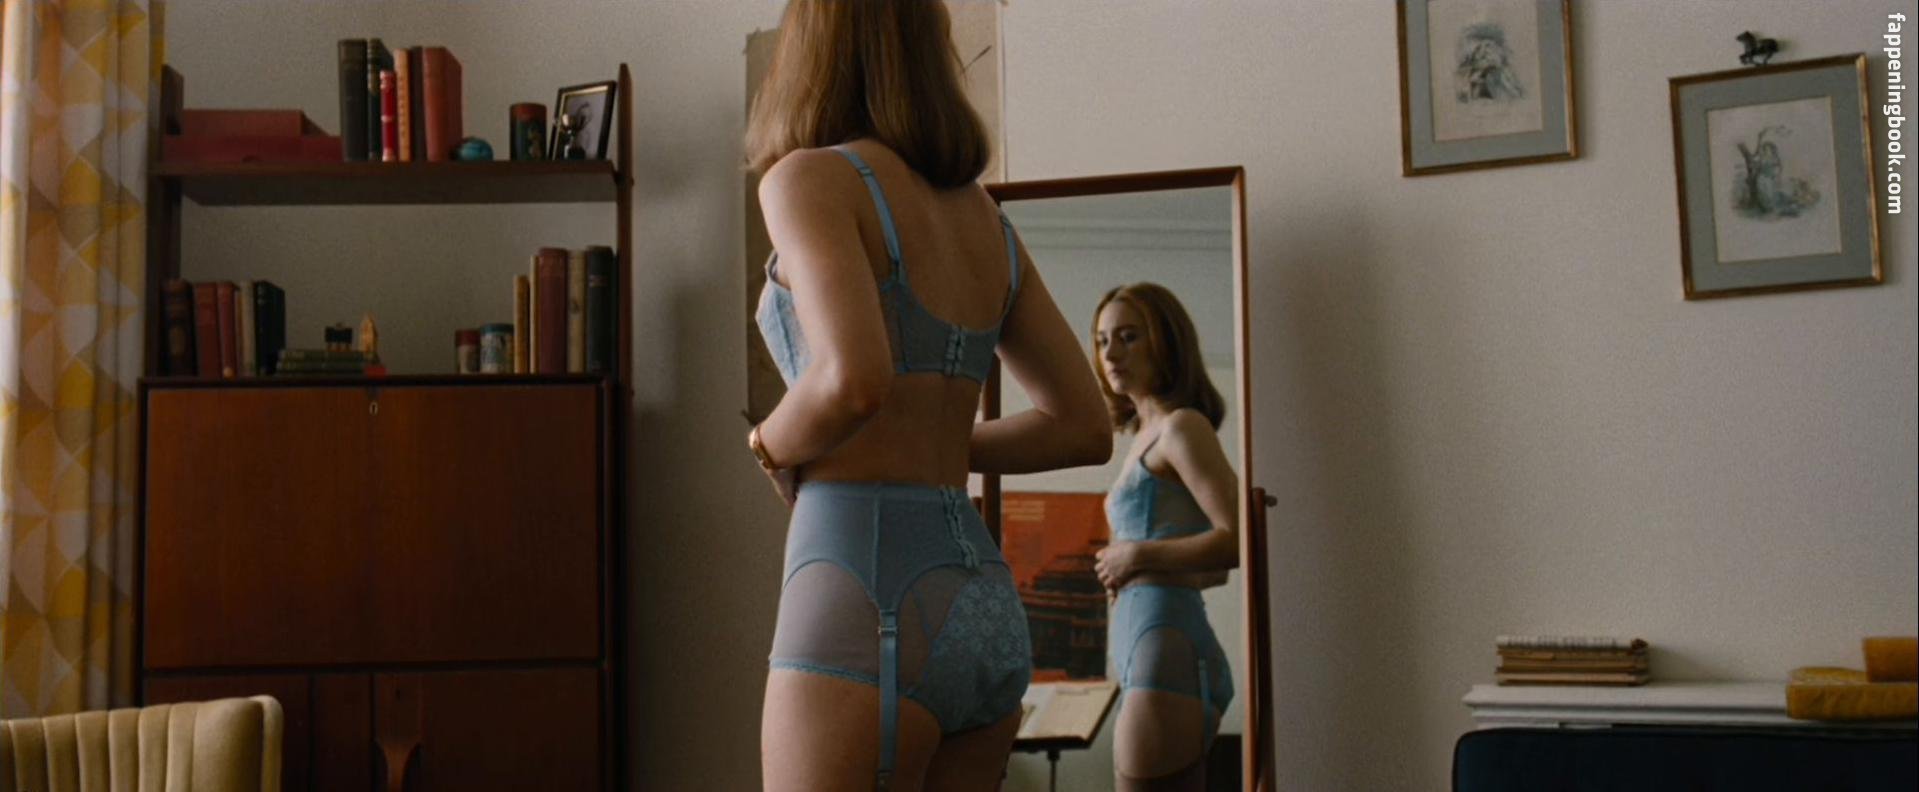 Saoirse Ronan Nude, The Fappening - Photo #477485 - FappeningBook